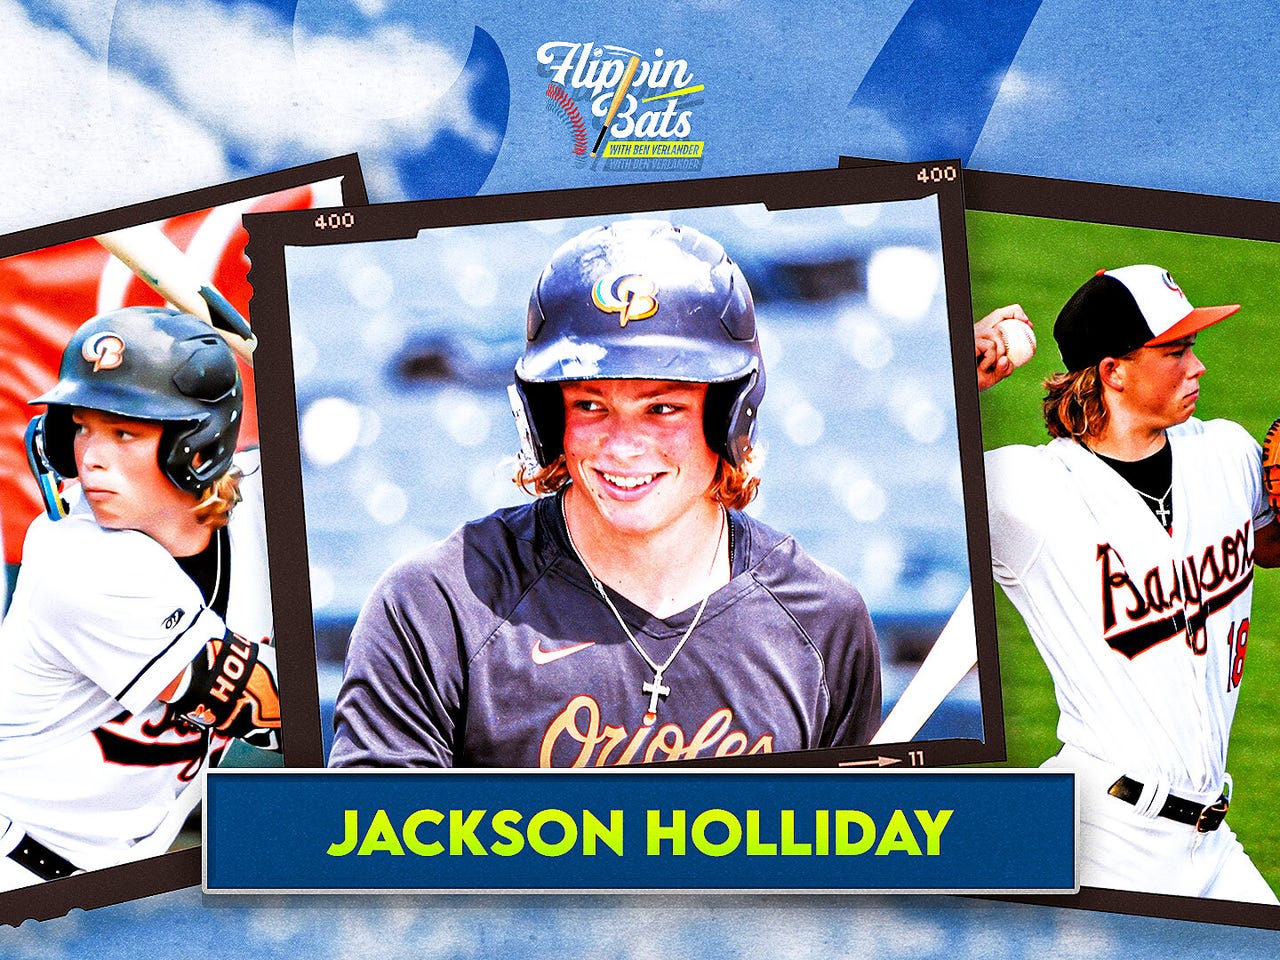 The next No. 1 prospect?: Shortstop Jackson Holliday is ready for